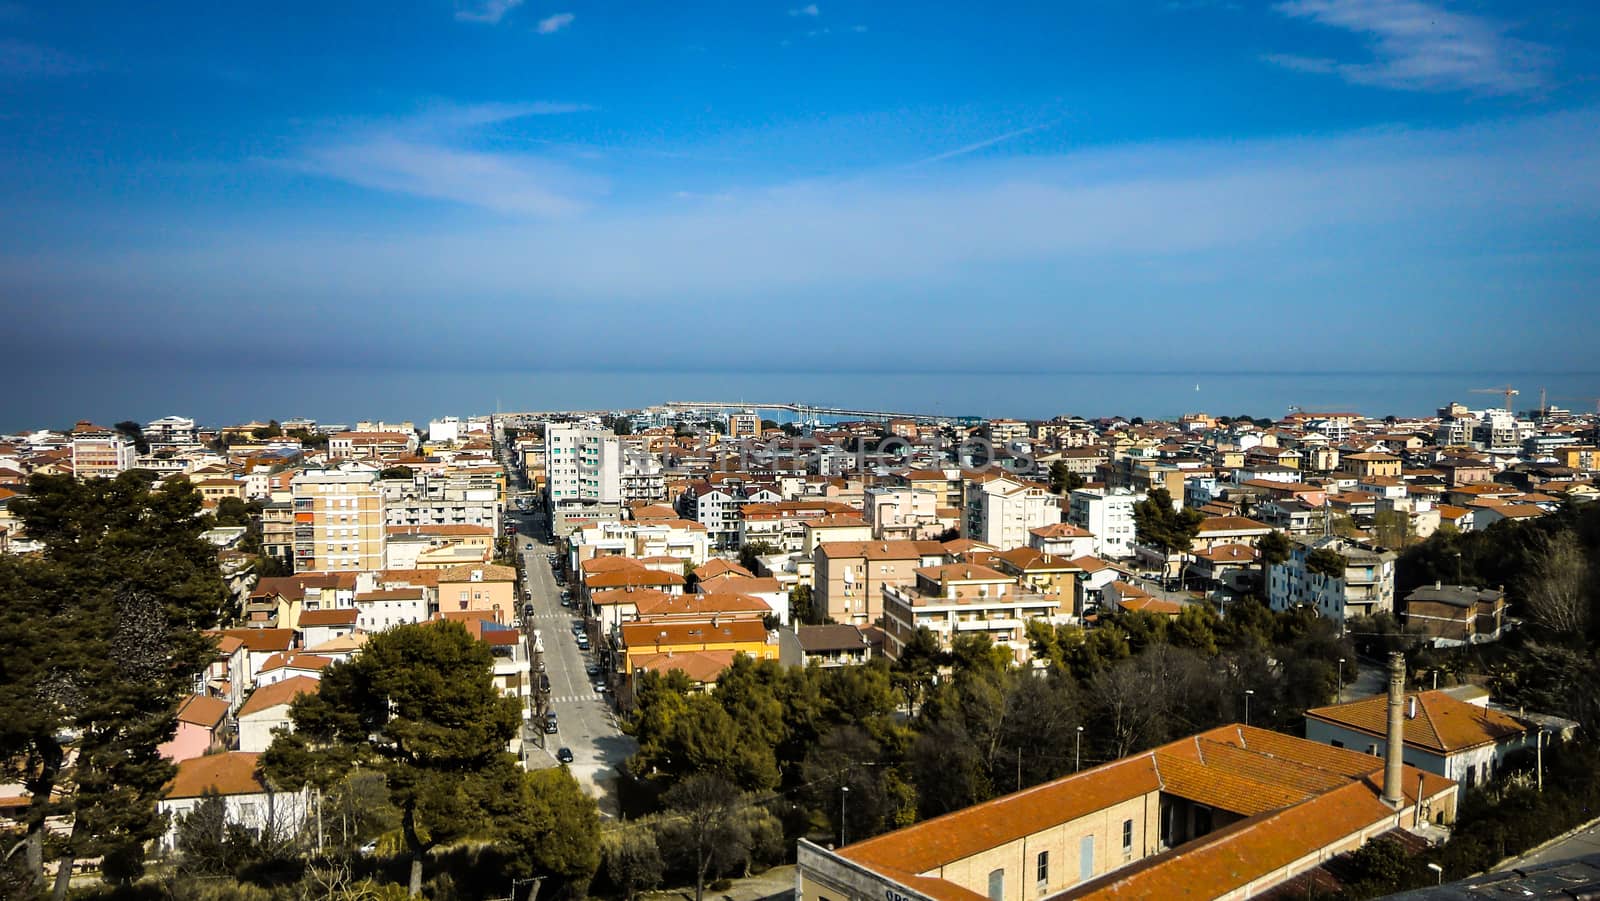 Giulianova from above by pippocarlot